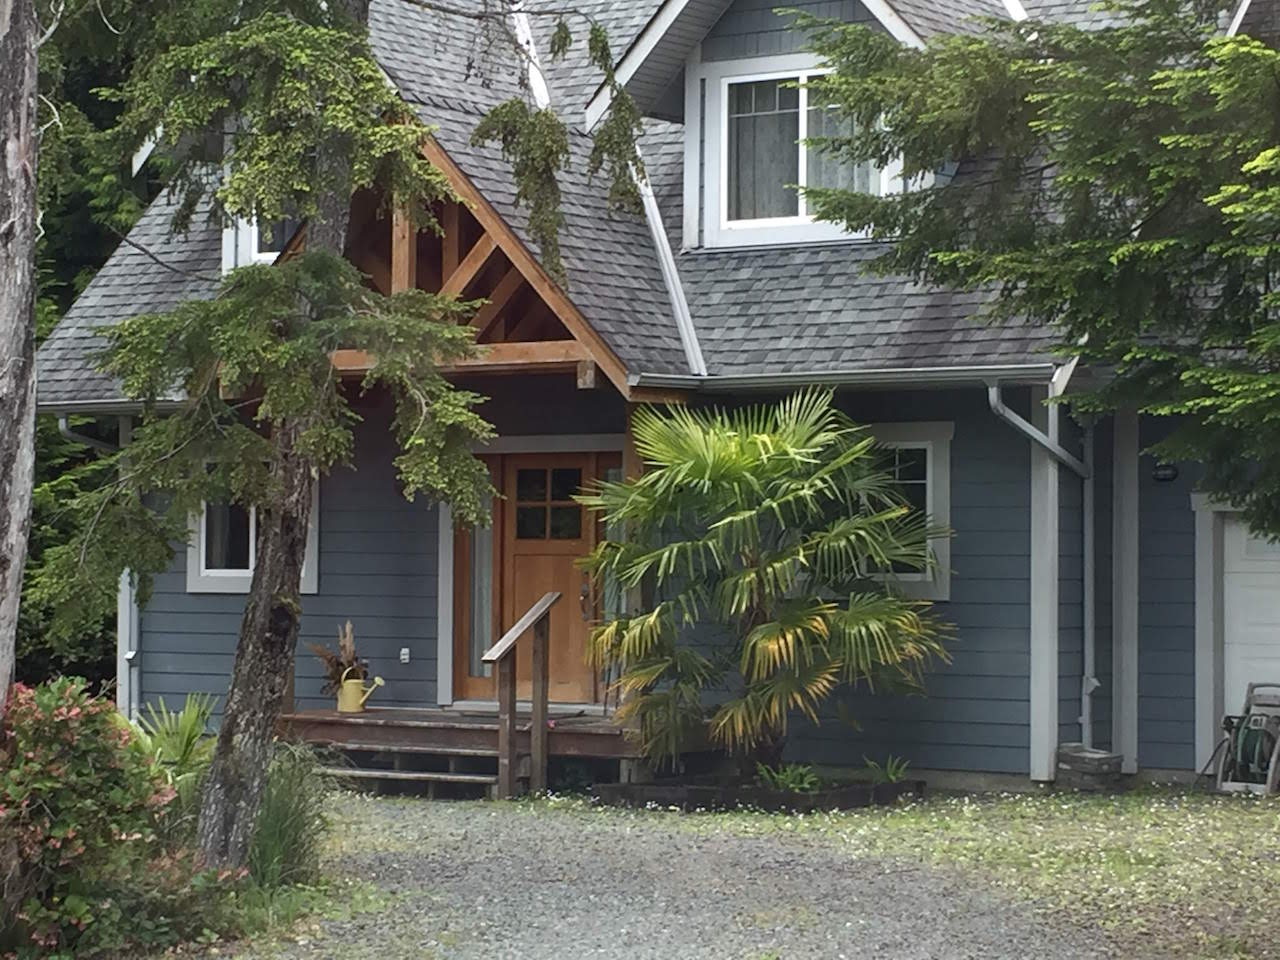 Outside shot of the front of a blue and grey home with pointed roof and wooden door